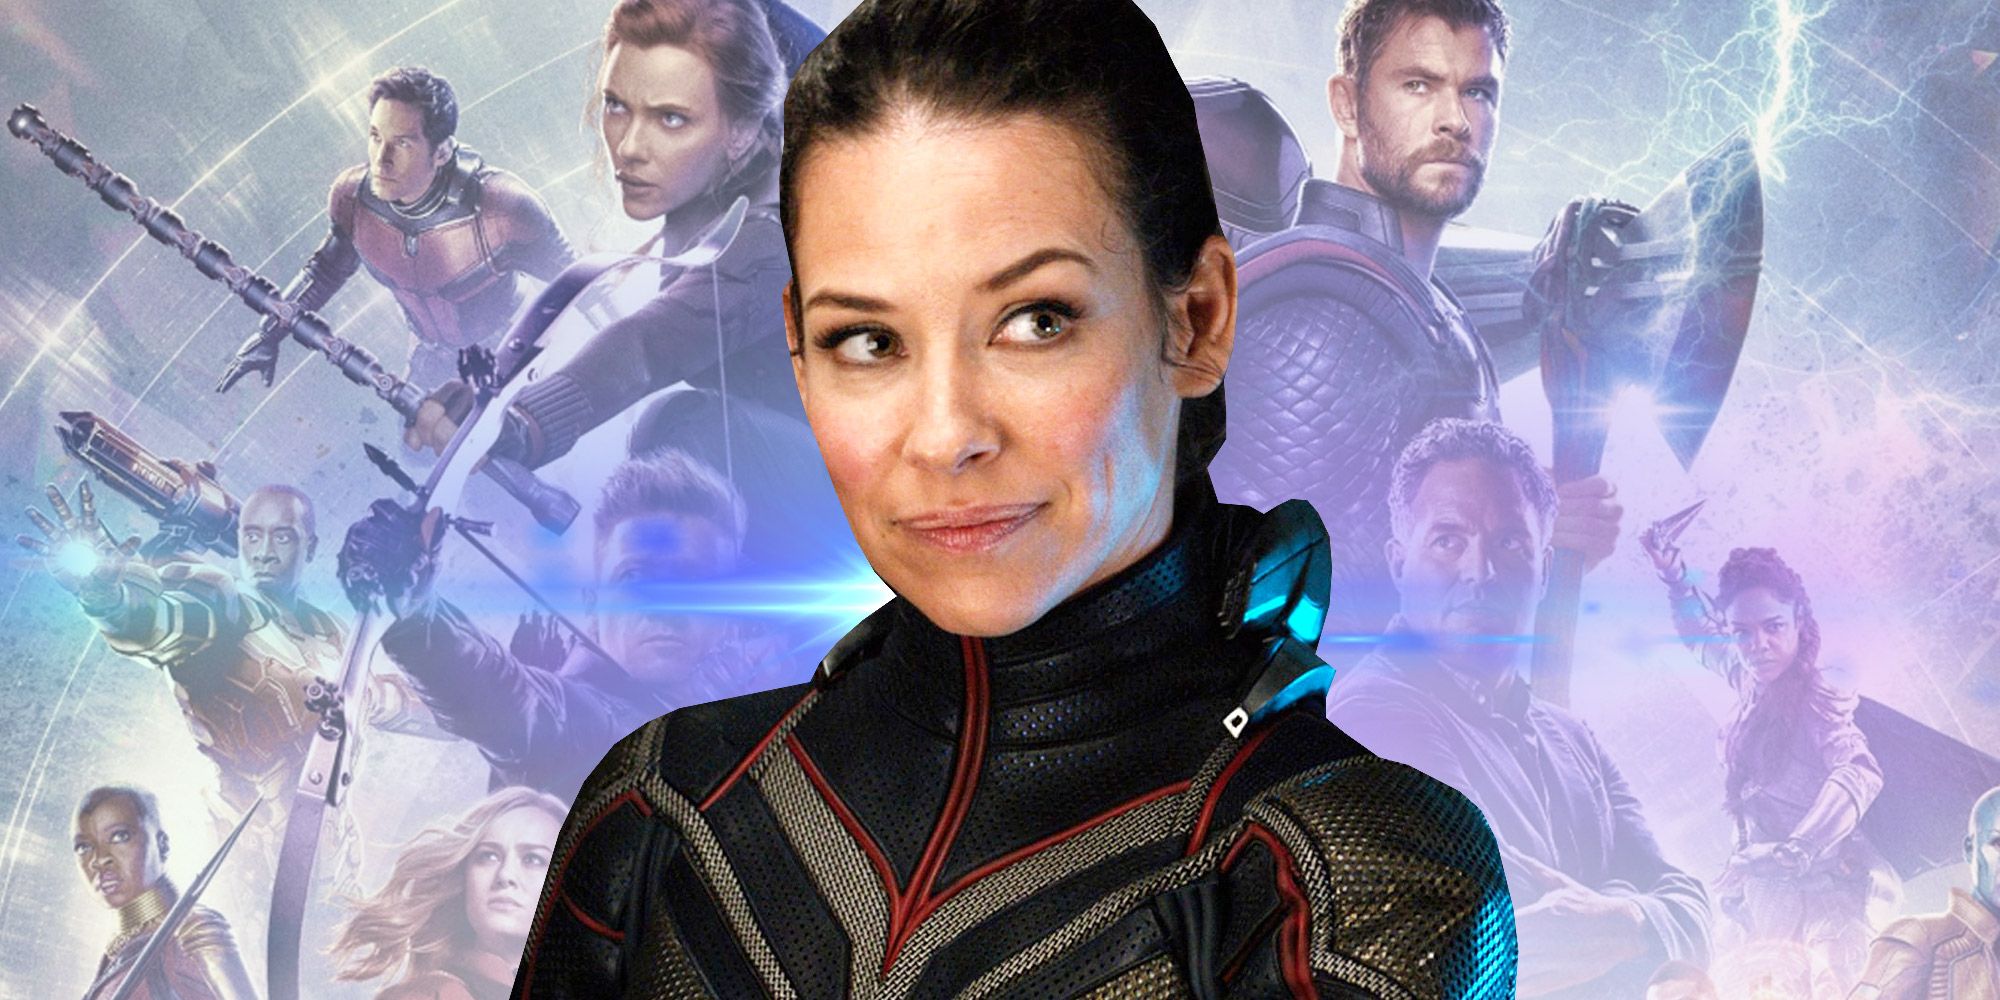 Evangeline Lilly wears our Acorn & Oak Leaf Necklace in Ant-Man